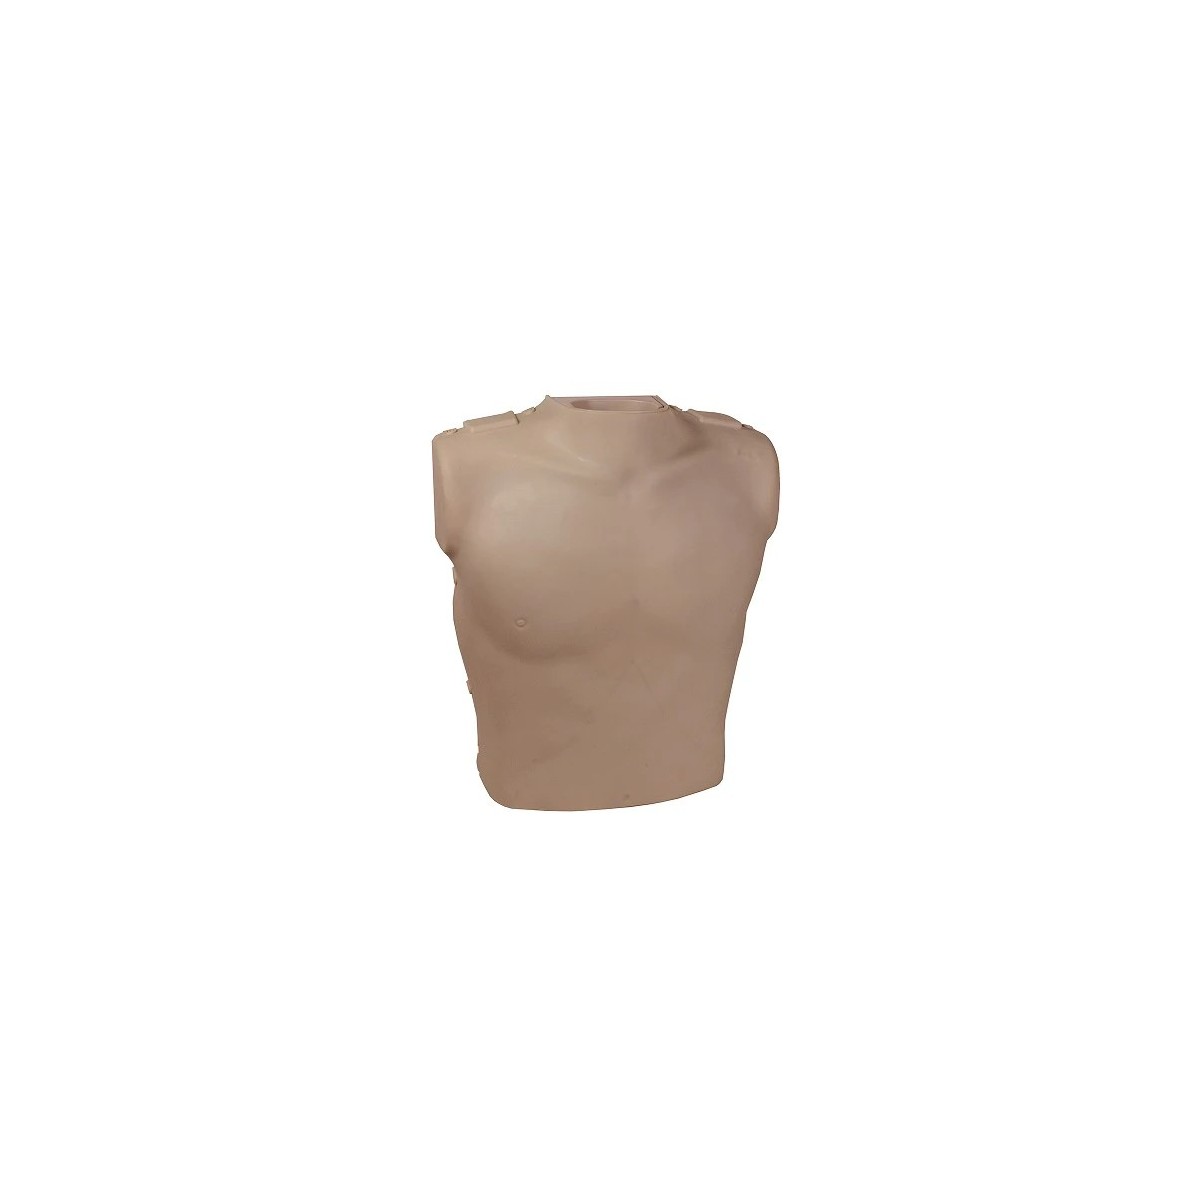 PRESTAN Torso Assembly with Monitor for the Professional Adult Dark Skin Manikin